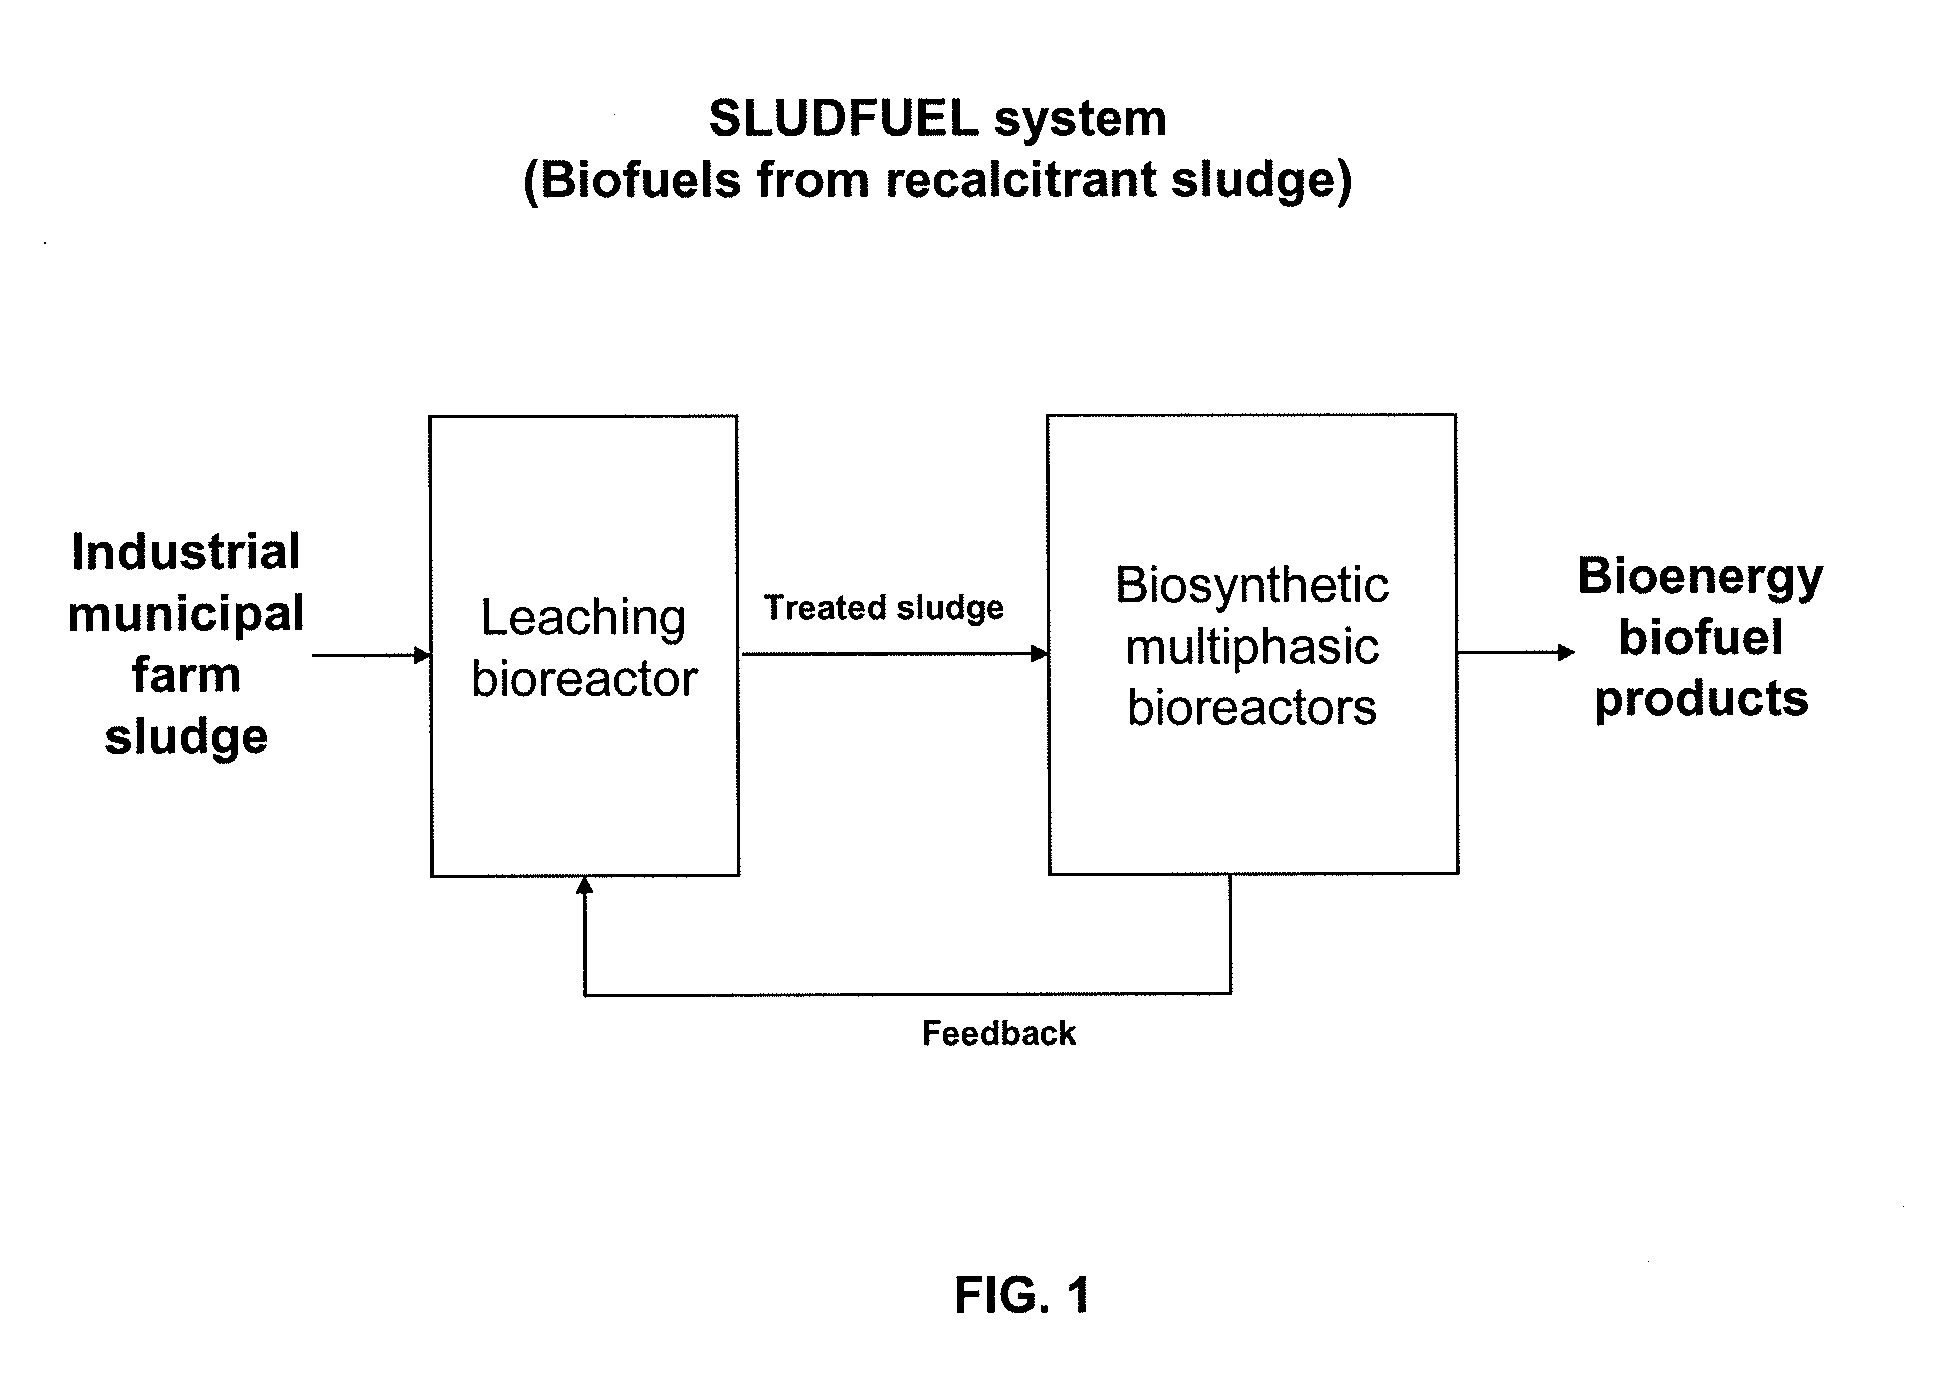 Methods and systems for production of biofuels and bioenergy products from sewage sludge, including recalcitrant sludge